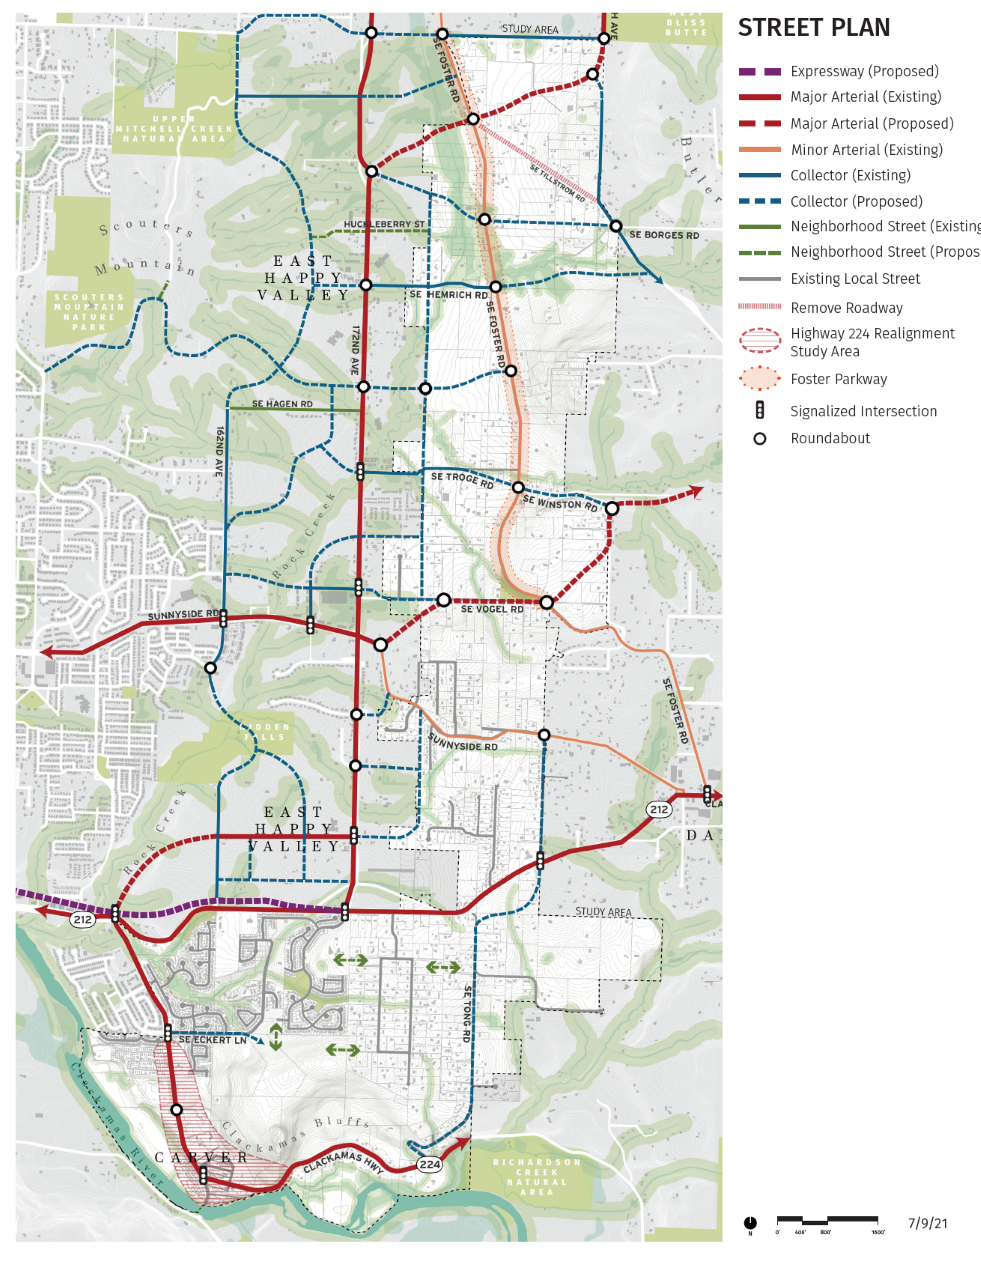 Map: Plan concepts, street network